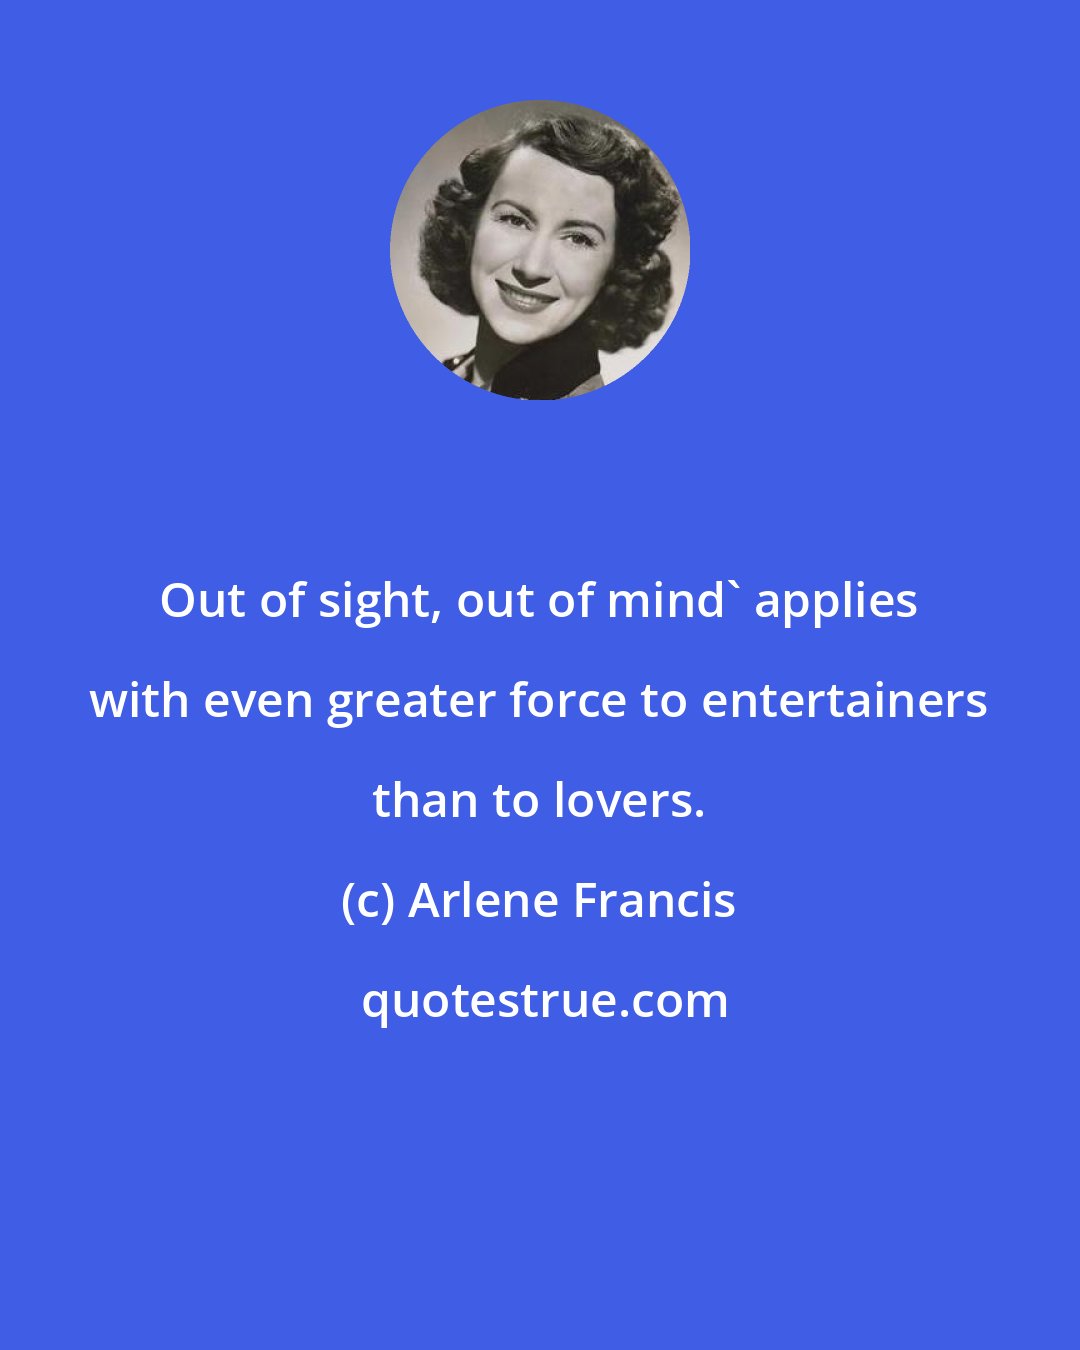 Arlene Francis: Out of sight, out of mind' applies with even greater force to entertainers than to lovers.